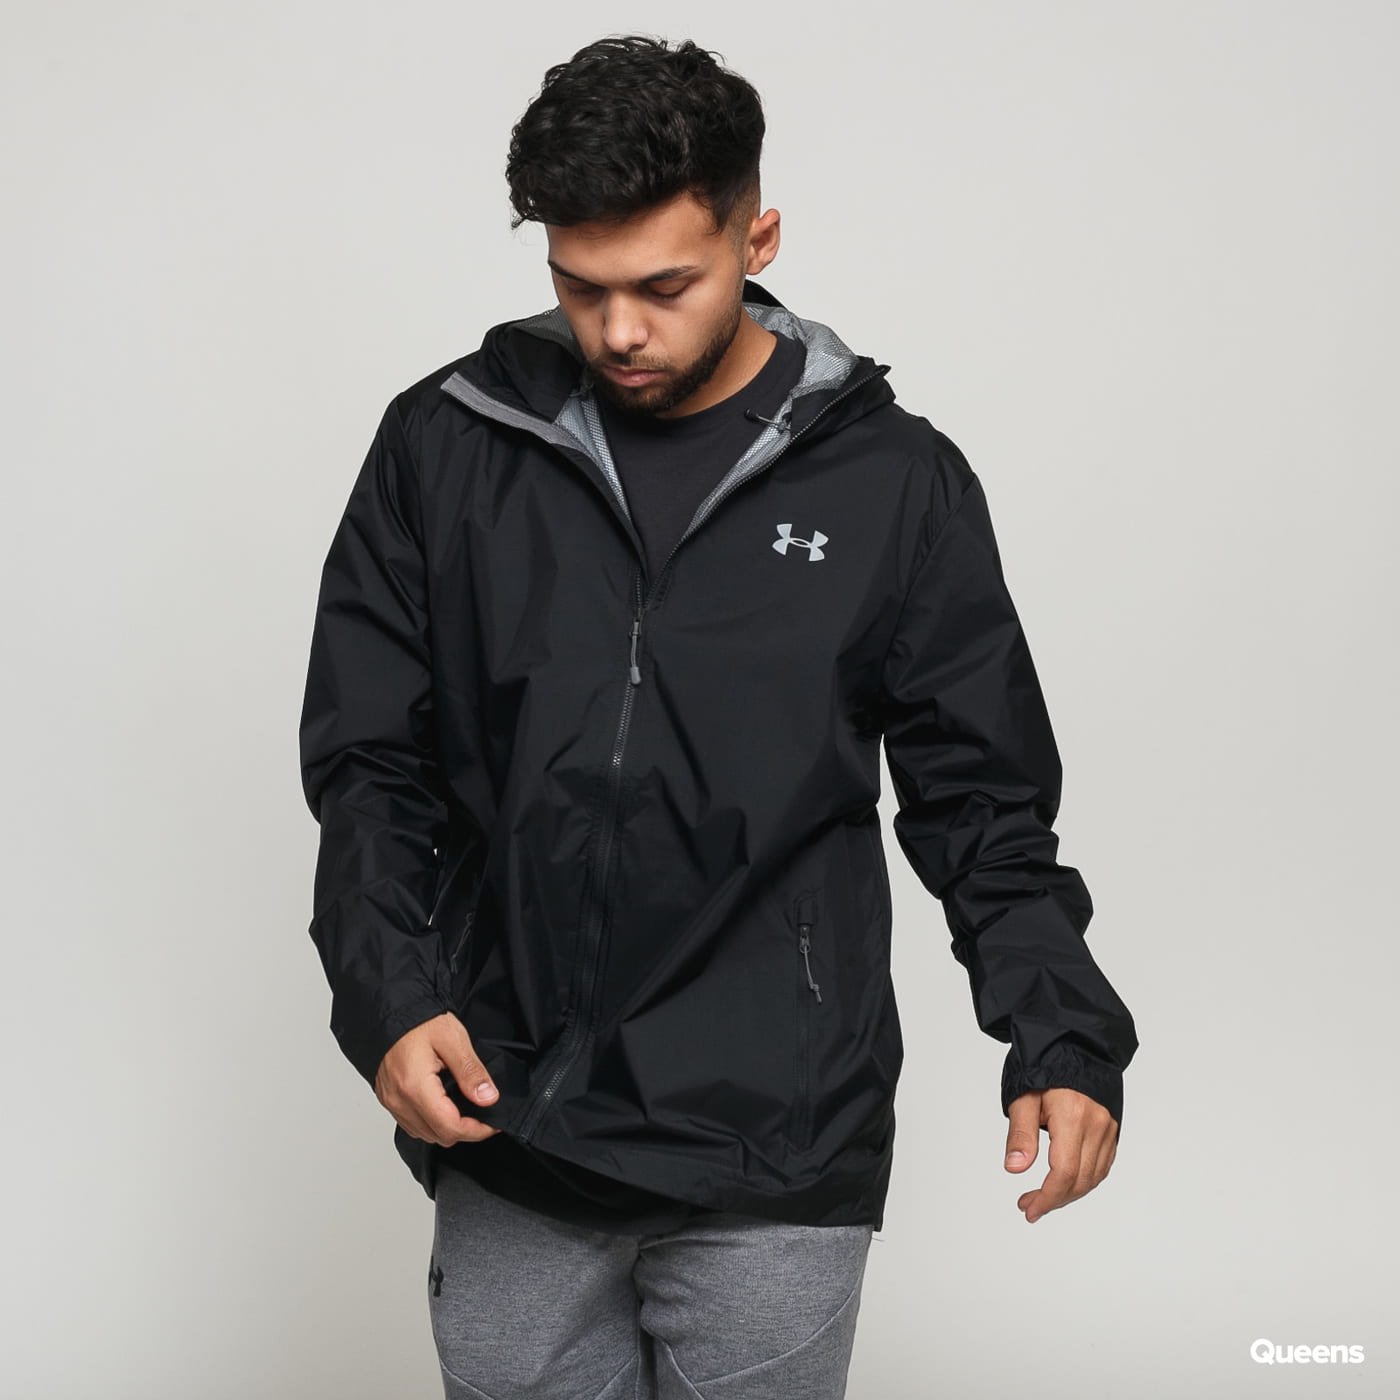 Under Armour Forefront Jacket Black Women